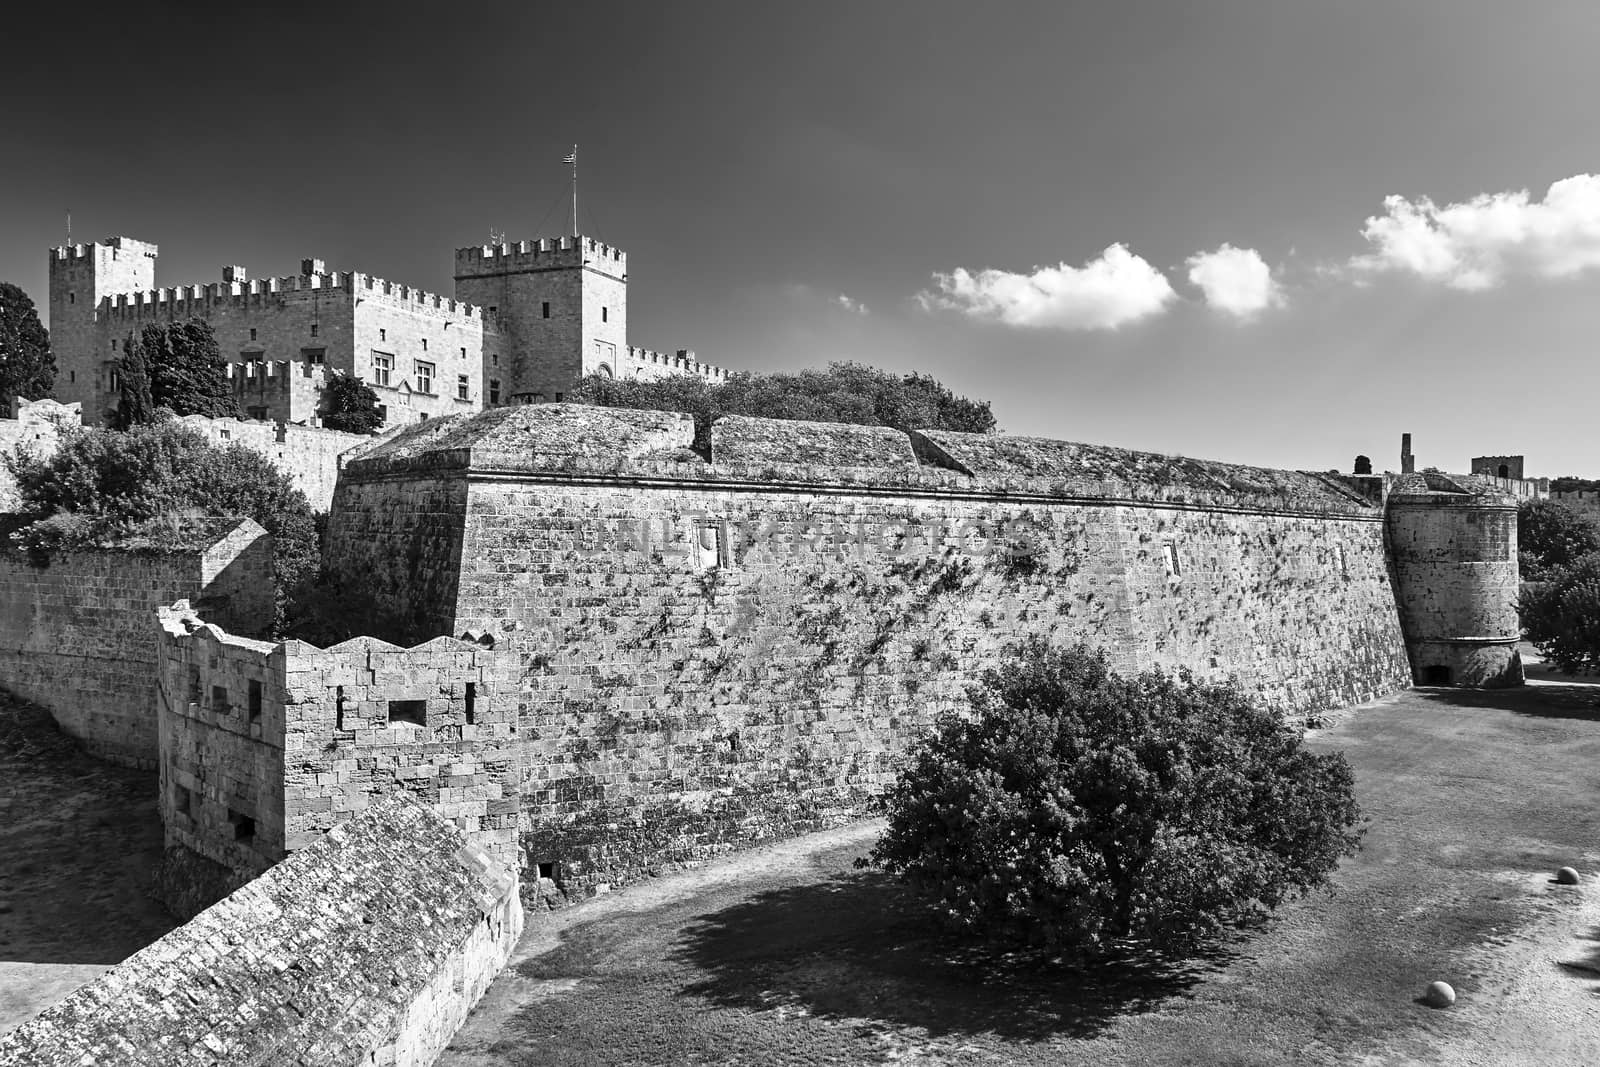 The walls and turrets of the medieval castle of the Joannite Order in the city of Rhodes, black and white